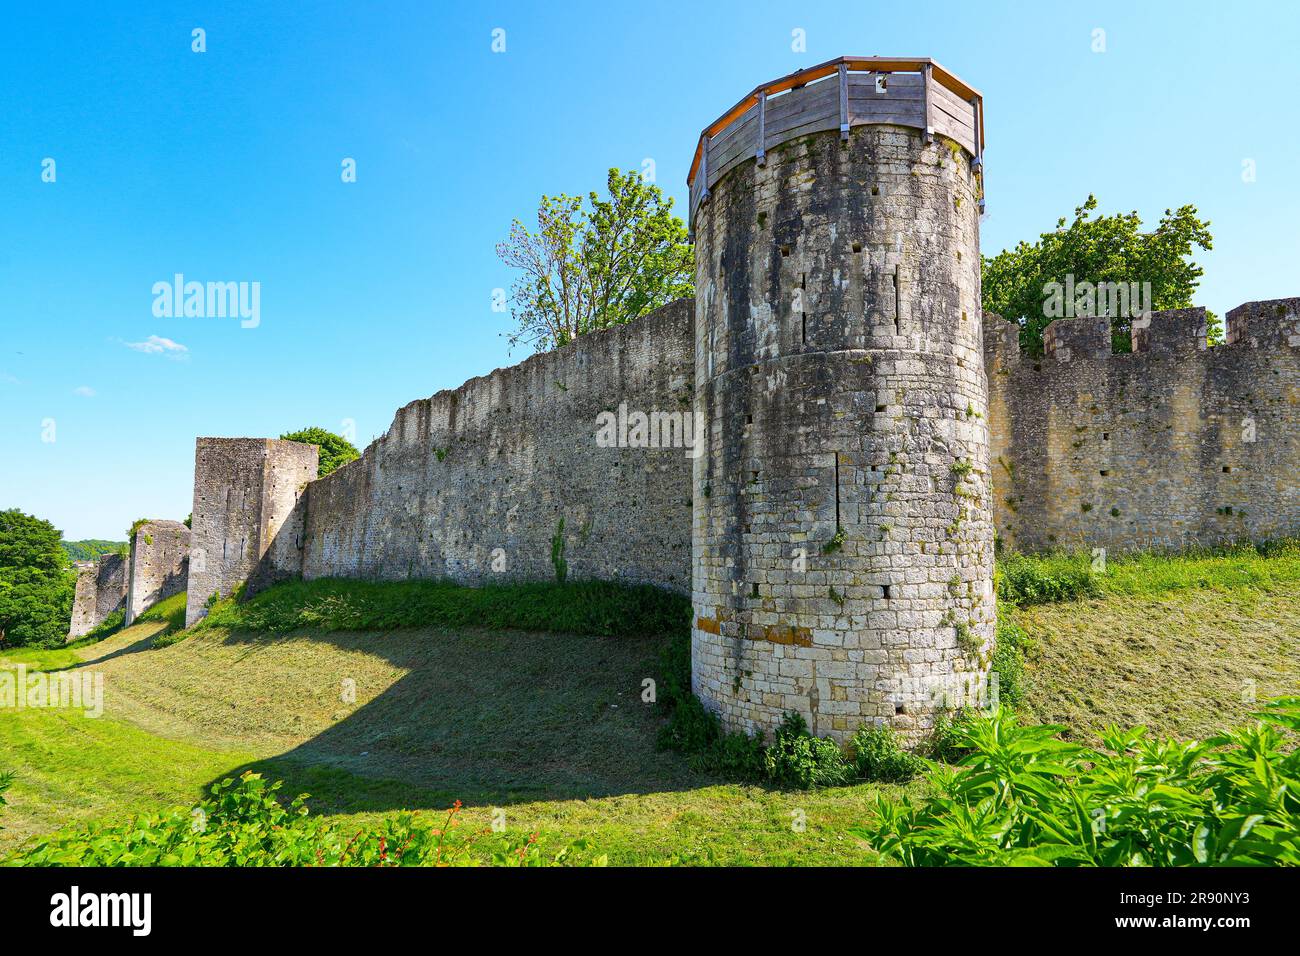 Ramparts of Provins, surrounding this World Heritage walled city located in the French department of Seine et Marne in Paris region - The town once ho Stock Photo